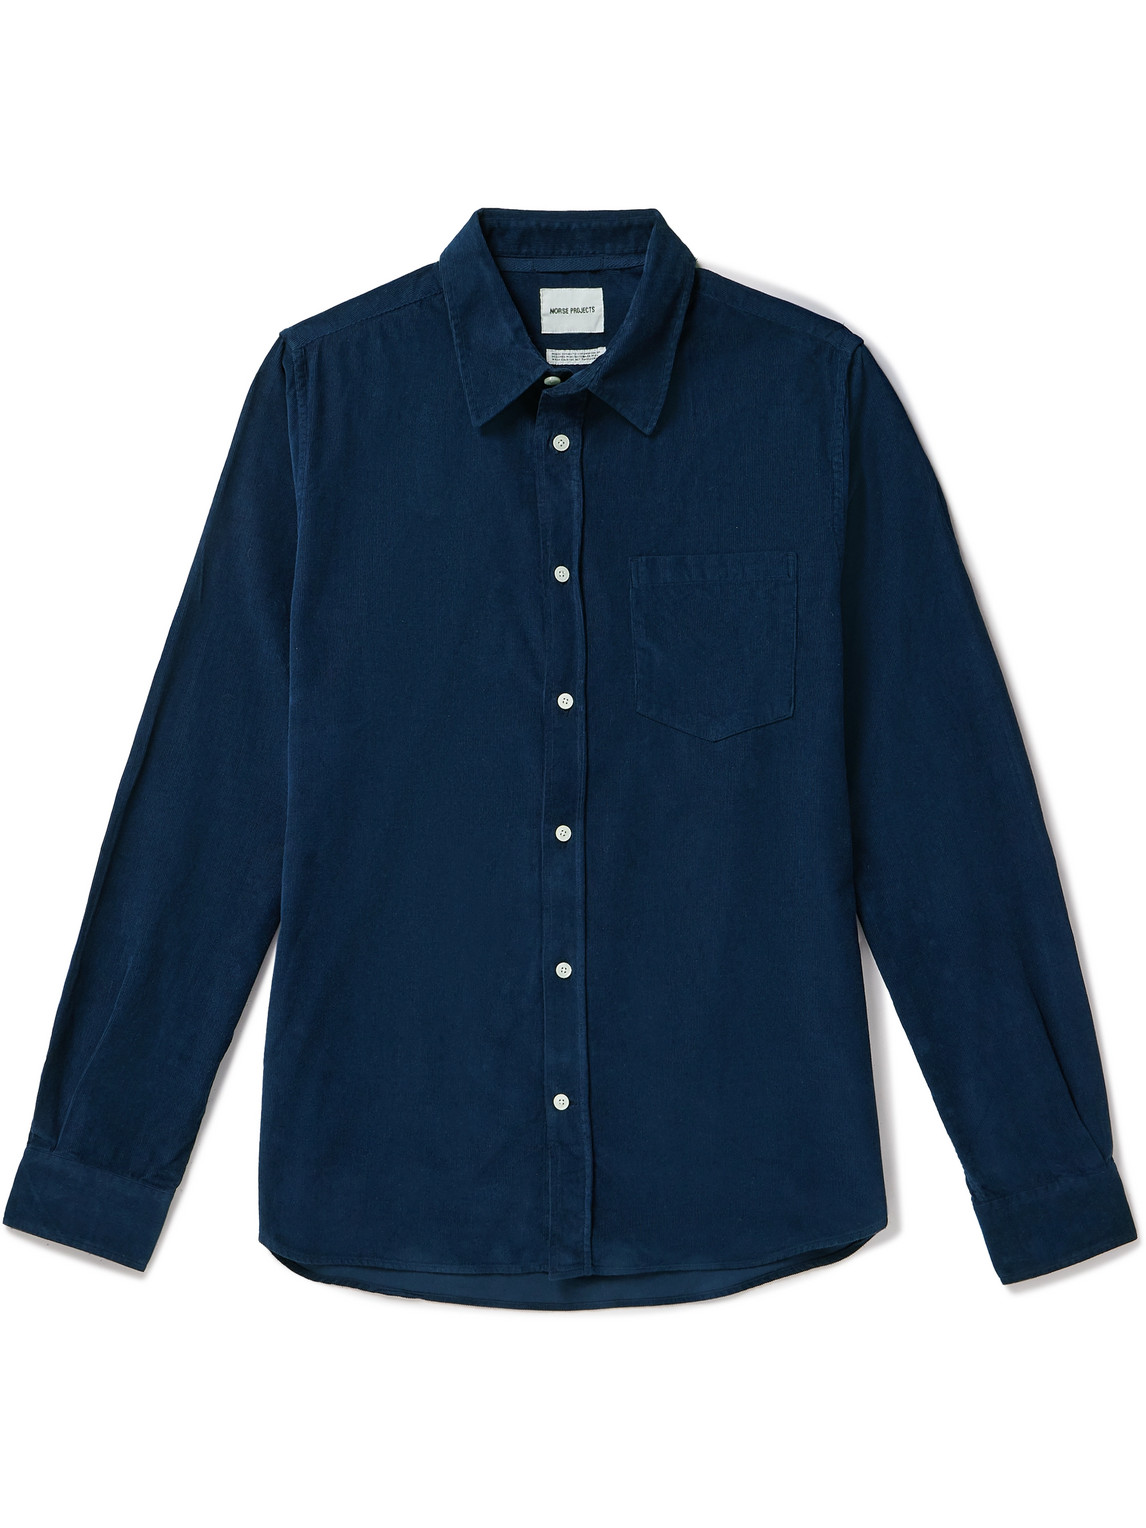 NORSE PROJECTS OSVALD GARMENT-DYED COTTON-CORDUROY SHIRT